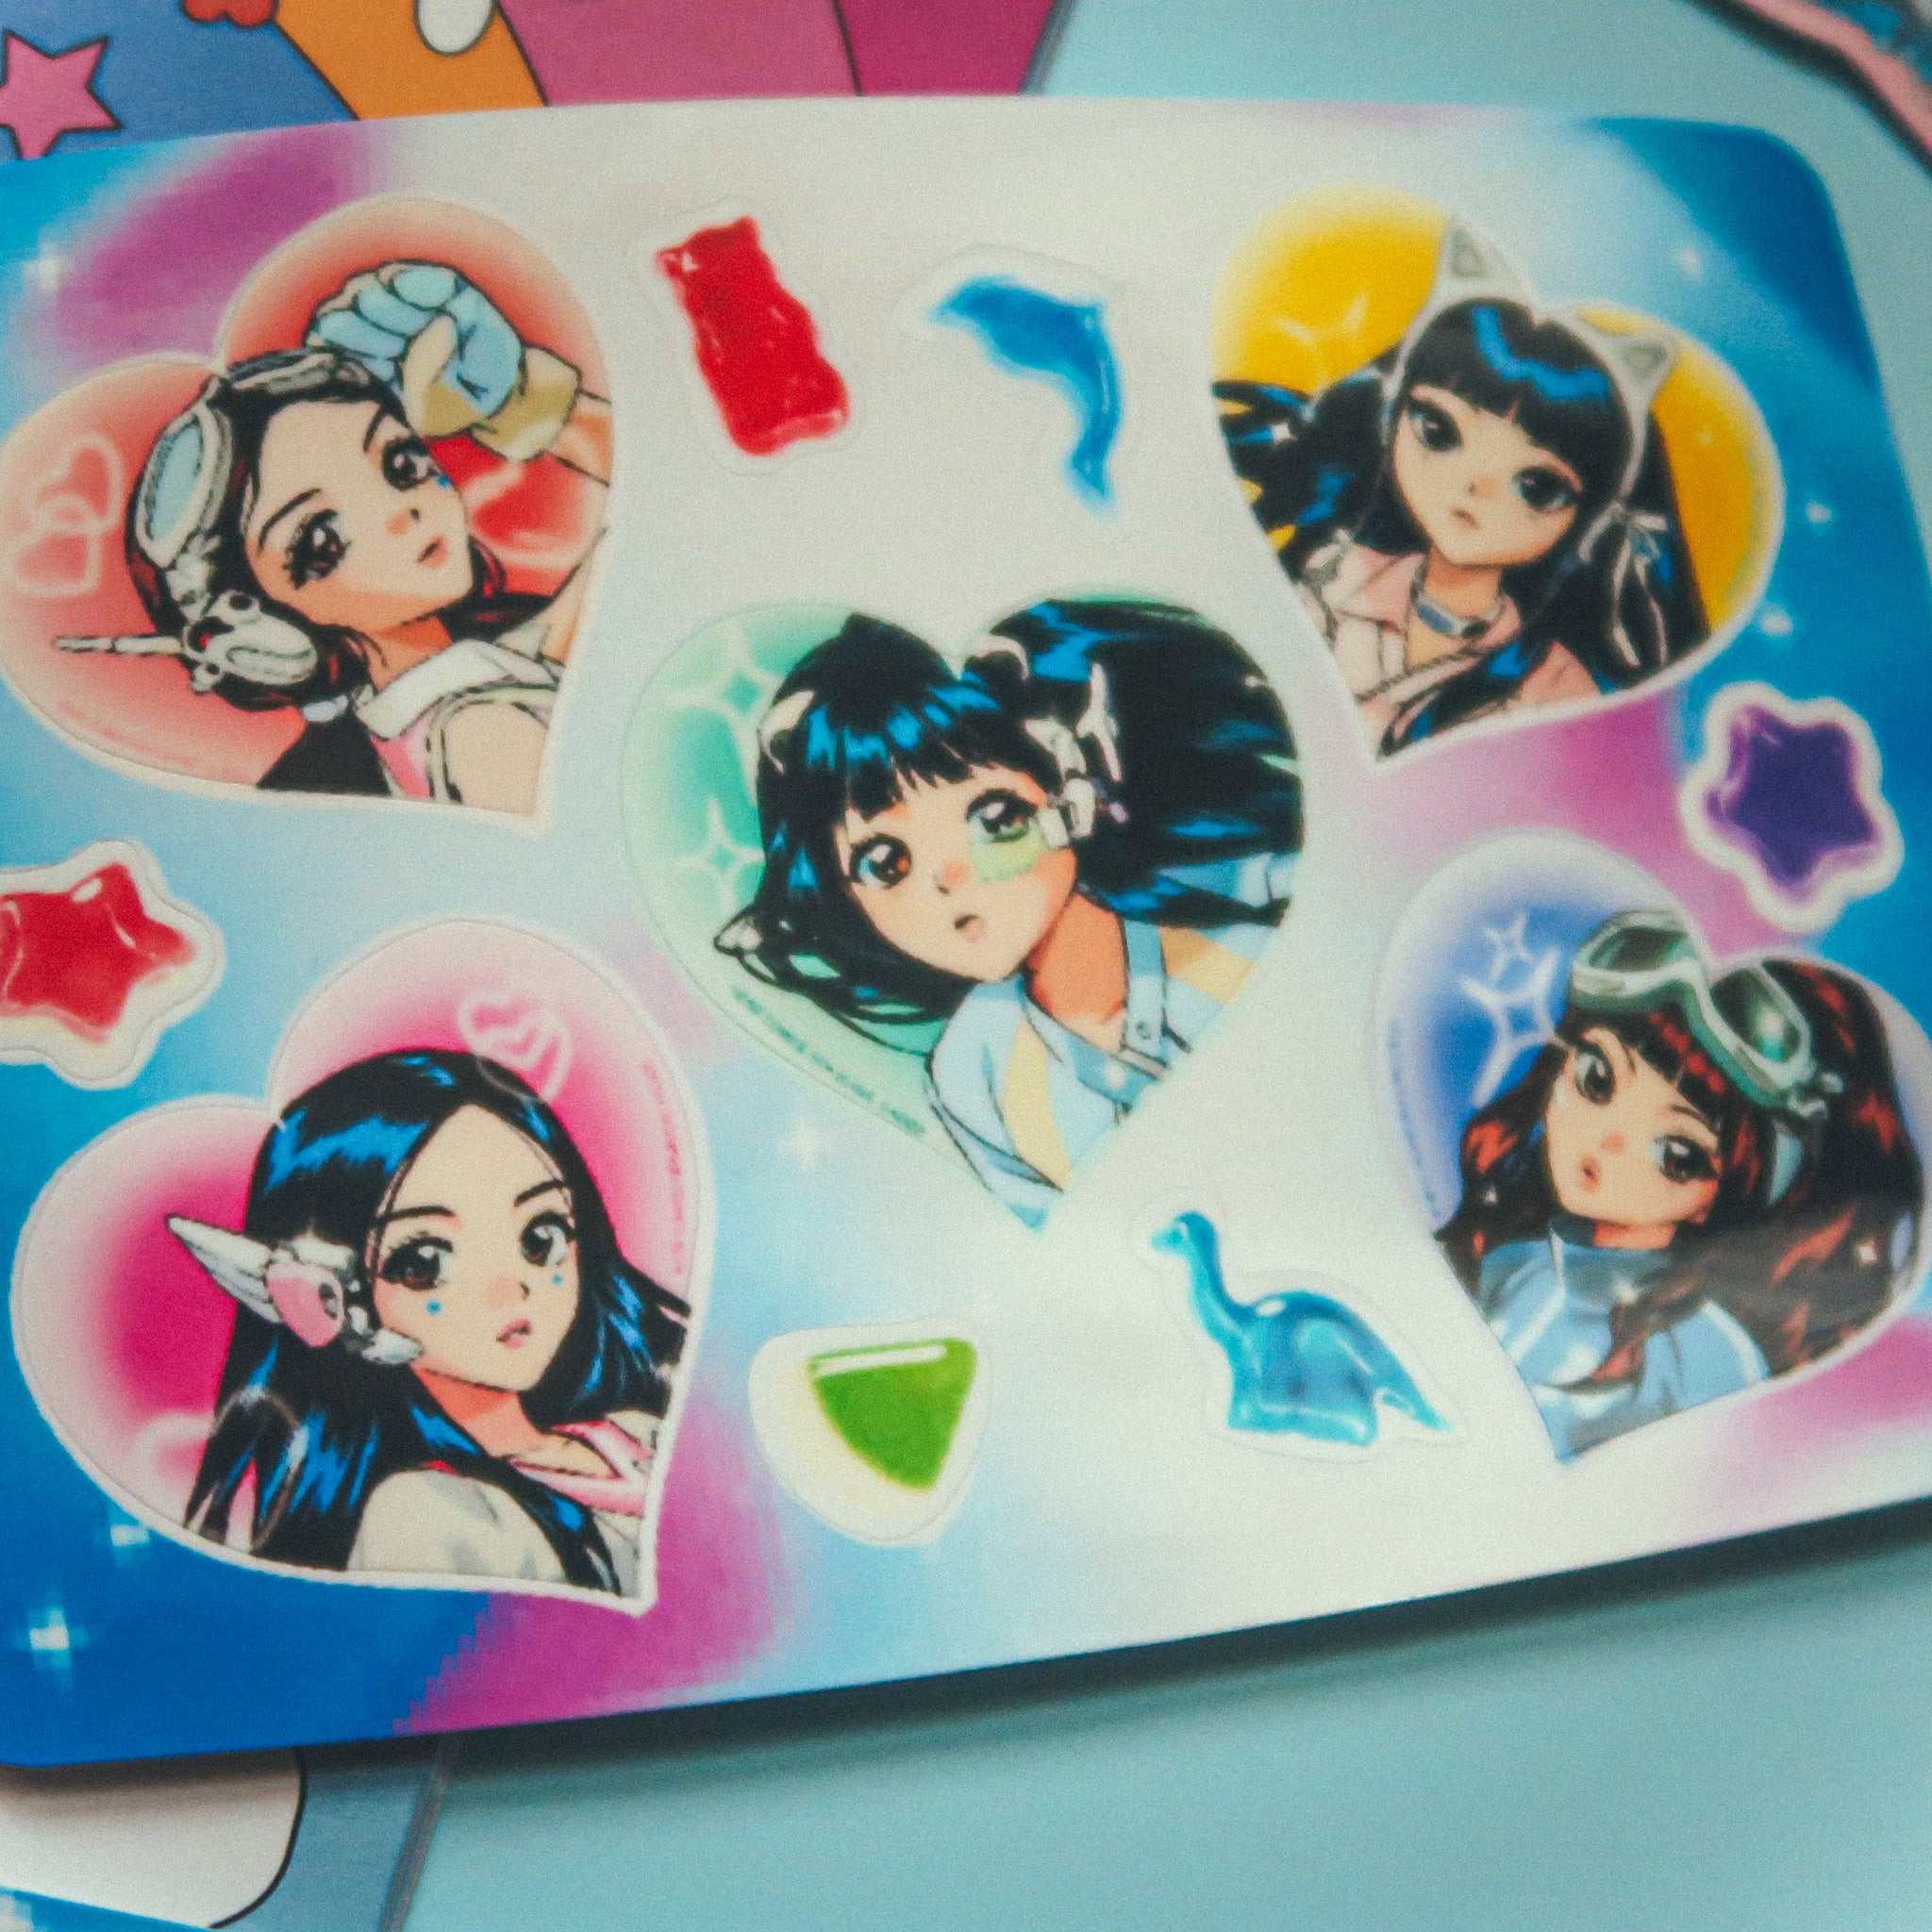 NewJeans K-pop idol group Get Up/ASAP/Super Shy Manga Anime Magical Girl Persona and Jellies Glossy Sticker Sheet